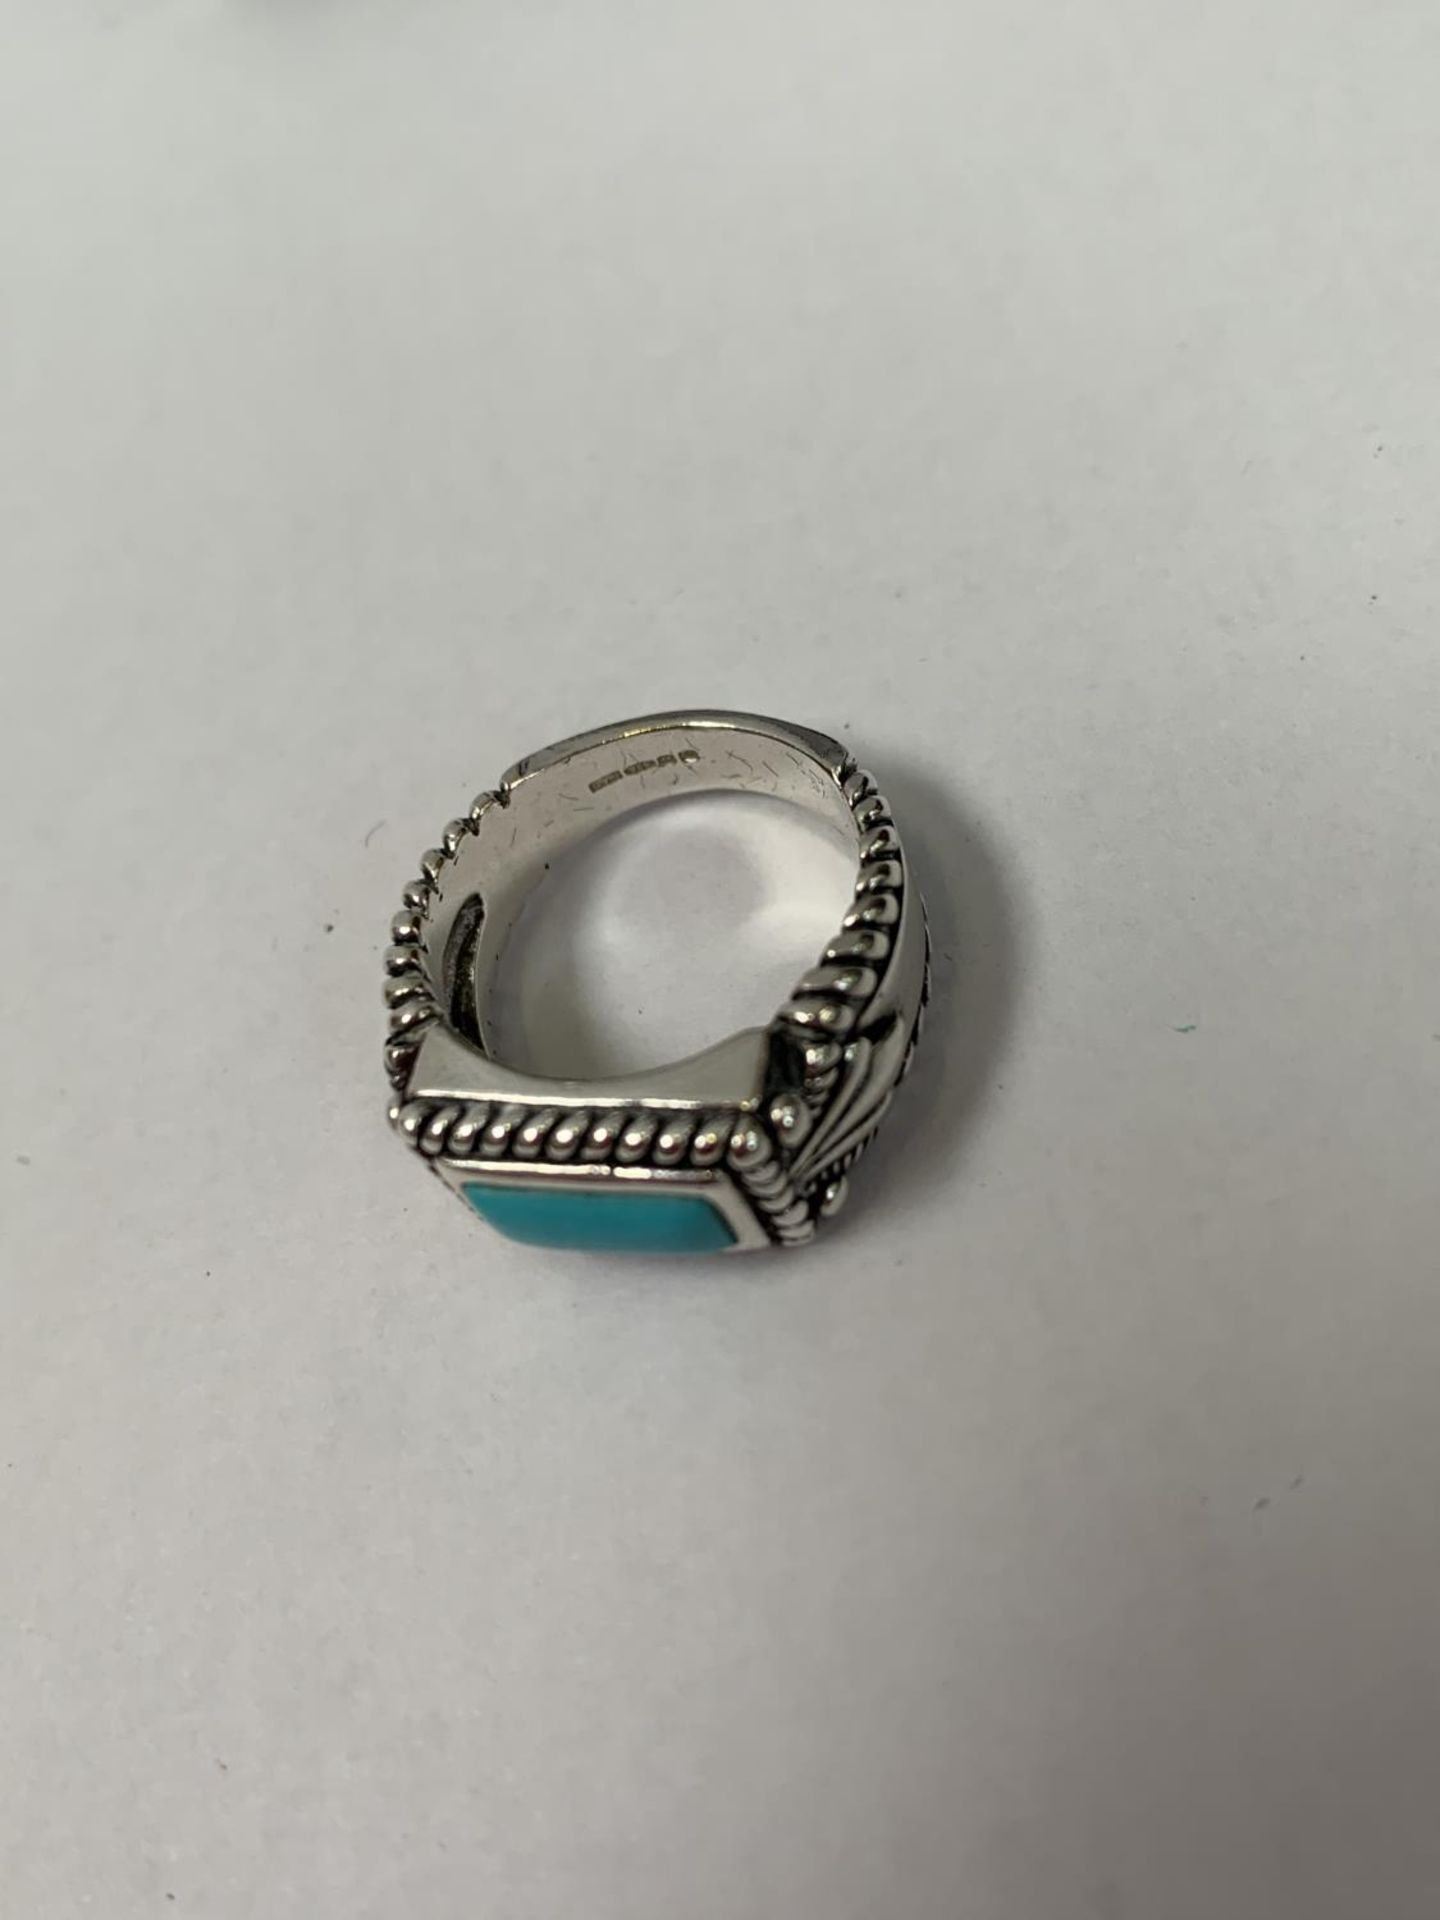 AN AMERICAN SILVER NAVAJO BLUE STONE RING - Image 2 of 2